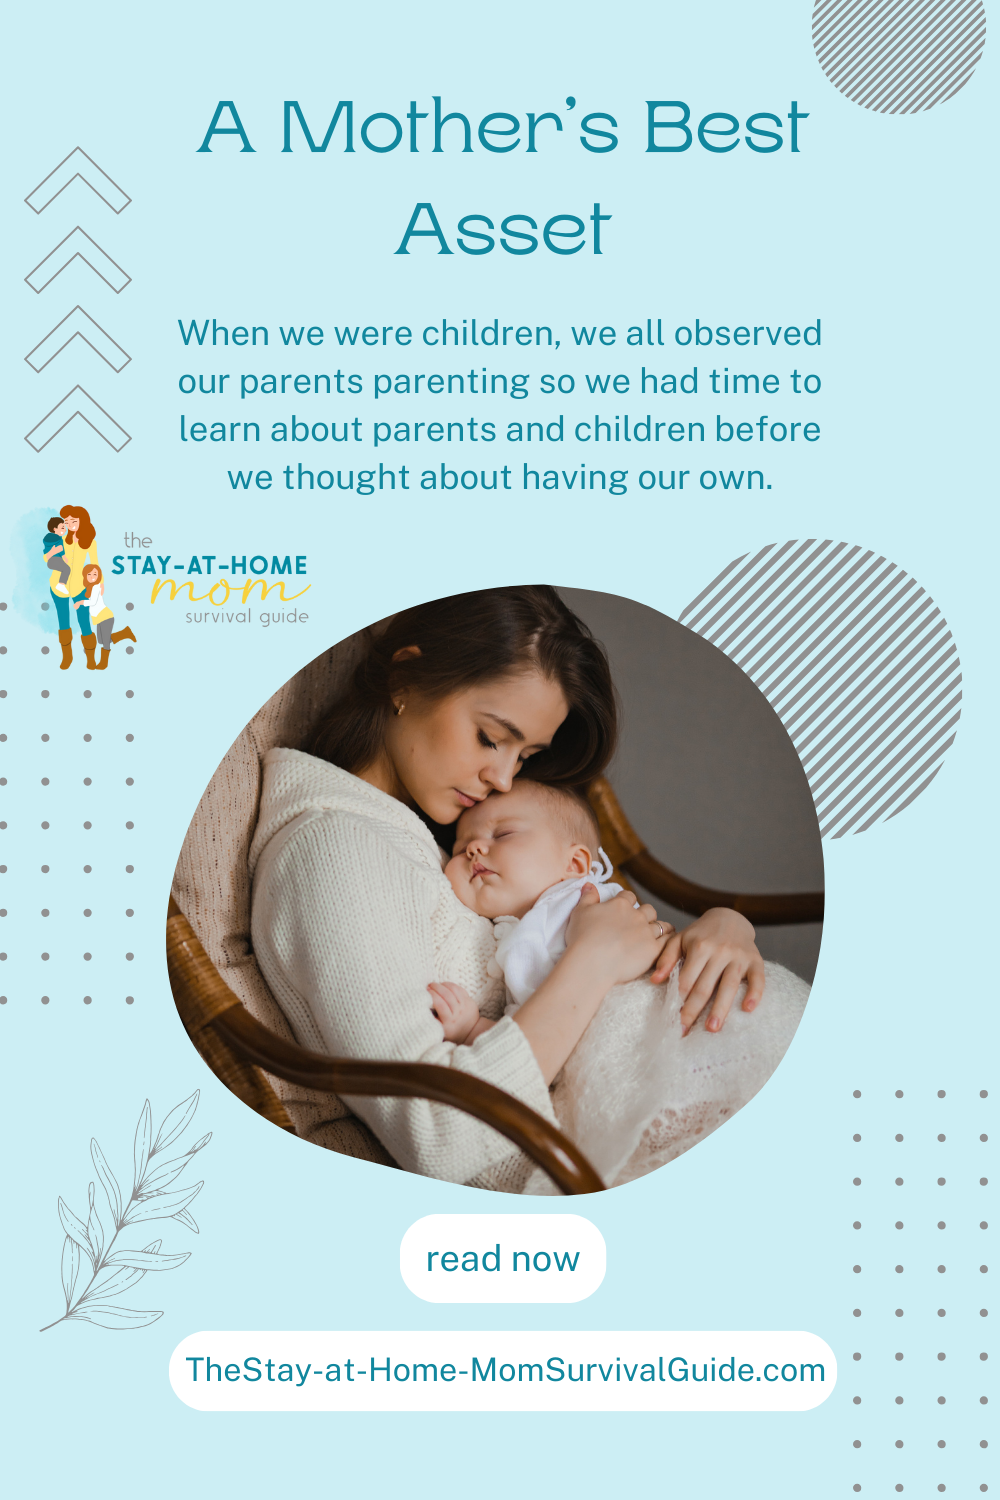 Mother holding a sleeping baby, rocking in a chair. Text reads A Mother's Best Asset: When we were children, we all observed our parents parenting so we had time to learn about parents and children before we thought about having our own. 